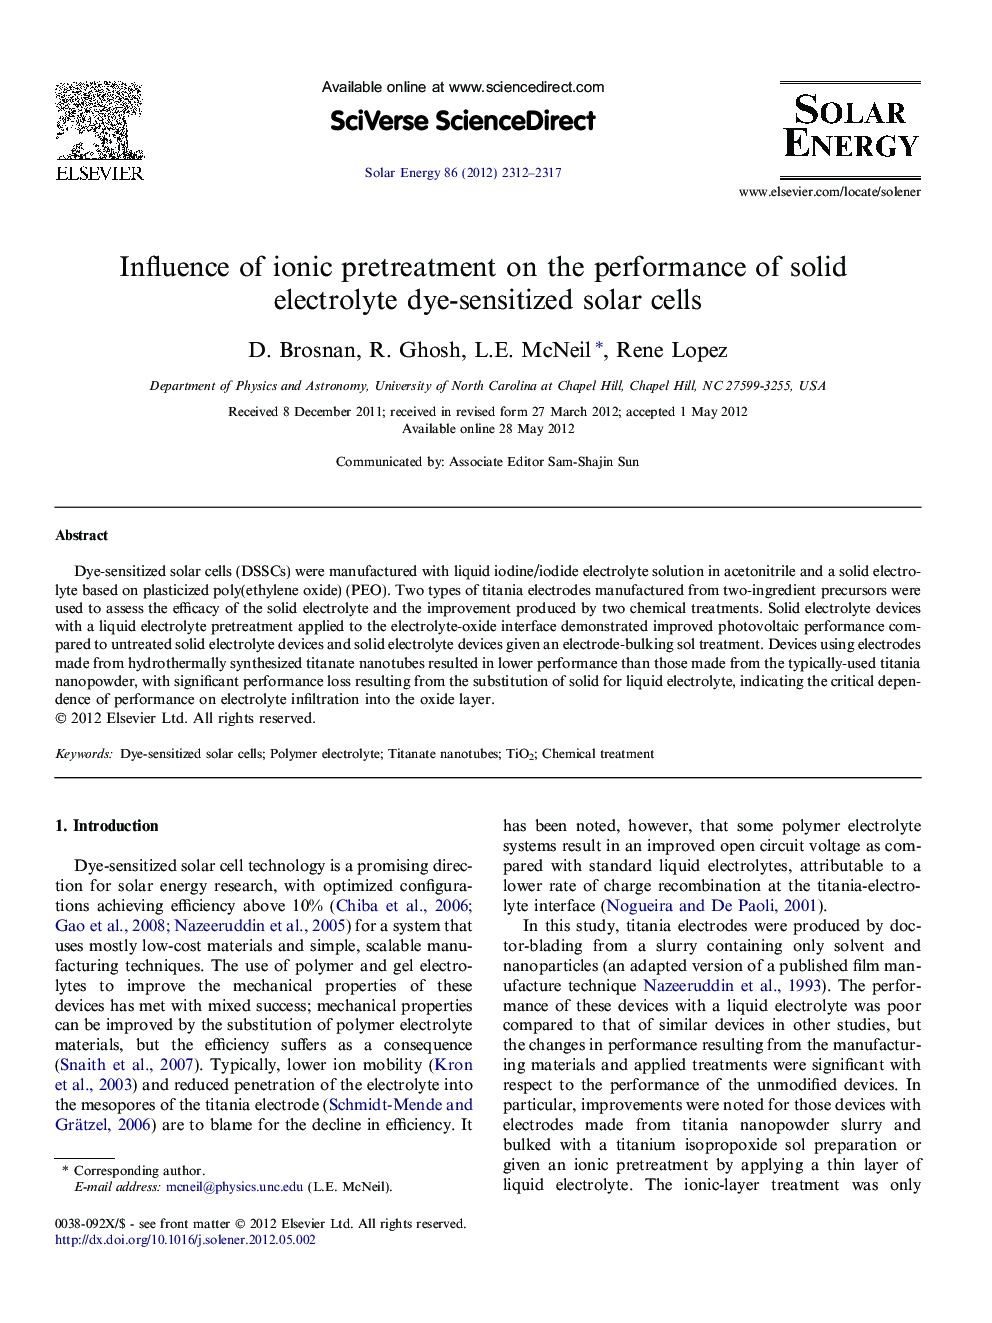 Influence of ionic pretreatment on the performance of solid electrolyte dye-sensitized solar cells